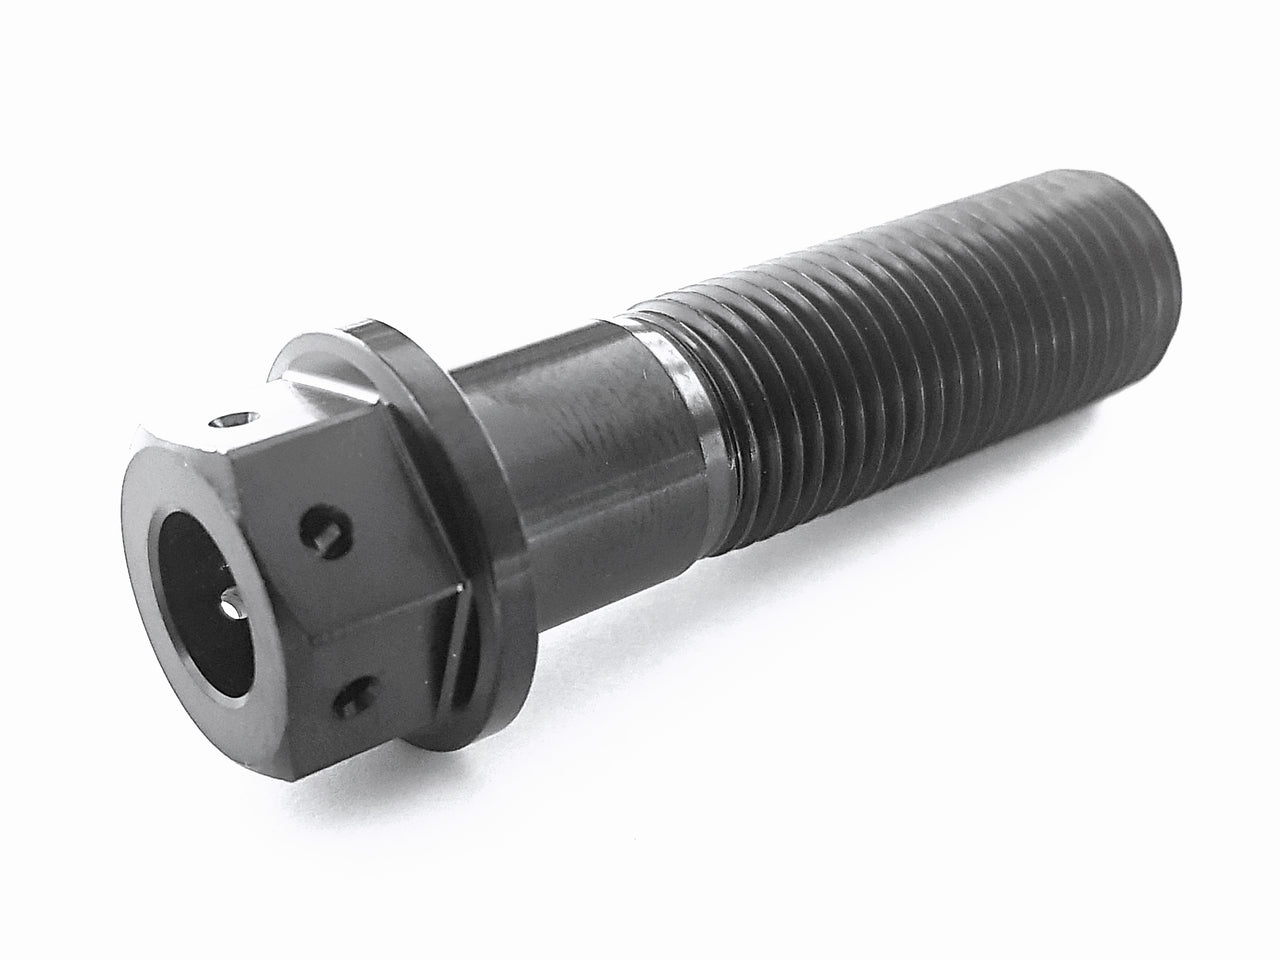 1/2 UNF 1.750" Black Reduced Hex Bolt With Holes Drilled